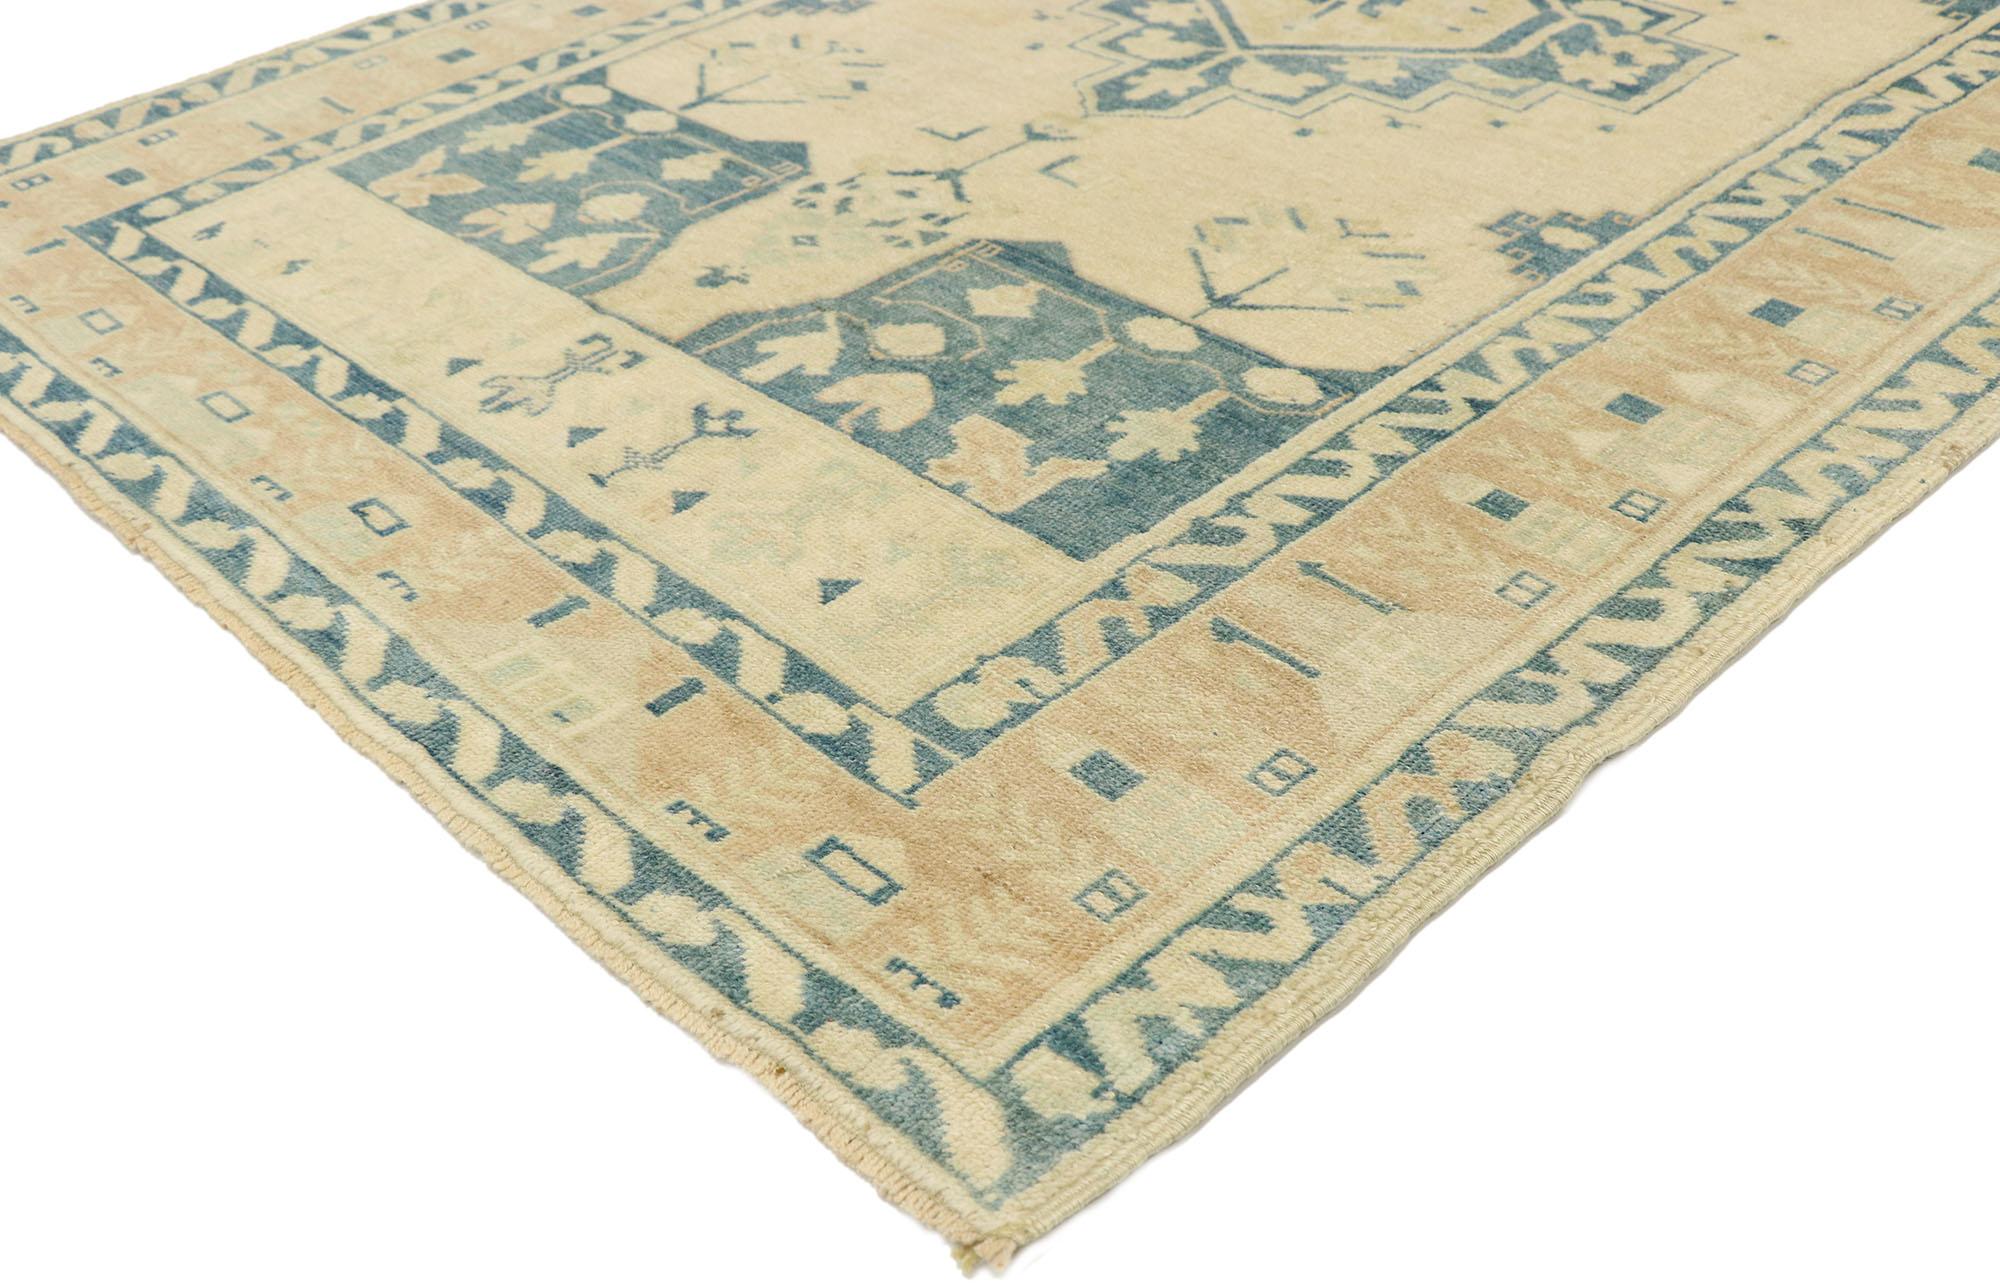 52956 Vintage Turkish Oushak rug with American Craftsman style. Drawing inspiration from American Craftsman style with its simplistic beauty and well-balanced symmetry, this hand knotted wool vintage Turkish Oushak rug displays nostalgic charm and